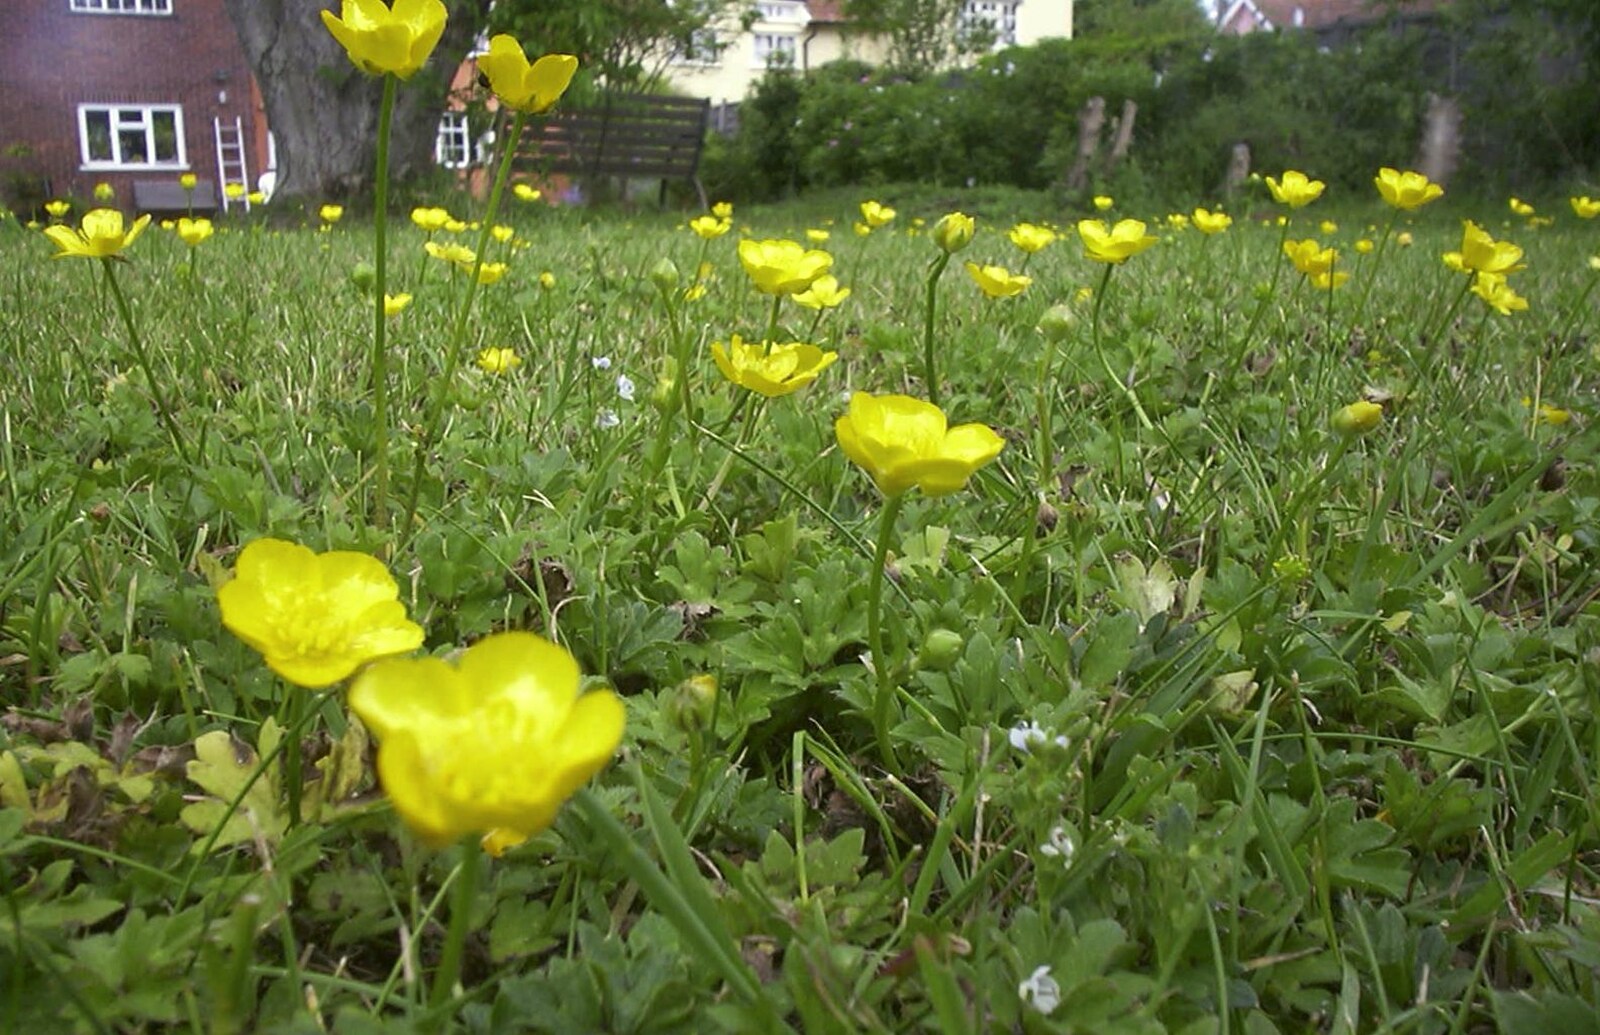 Close-up with some buttercups in the lawn from A Transit of Venus and a Front Garden Barbeque, Brome - 11th June 2004